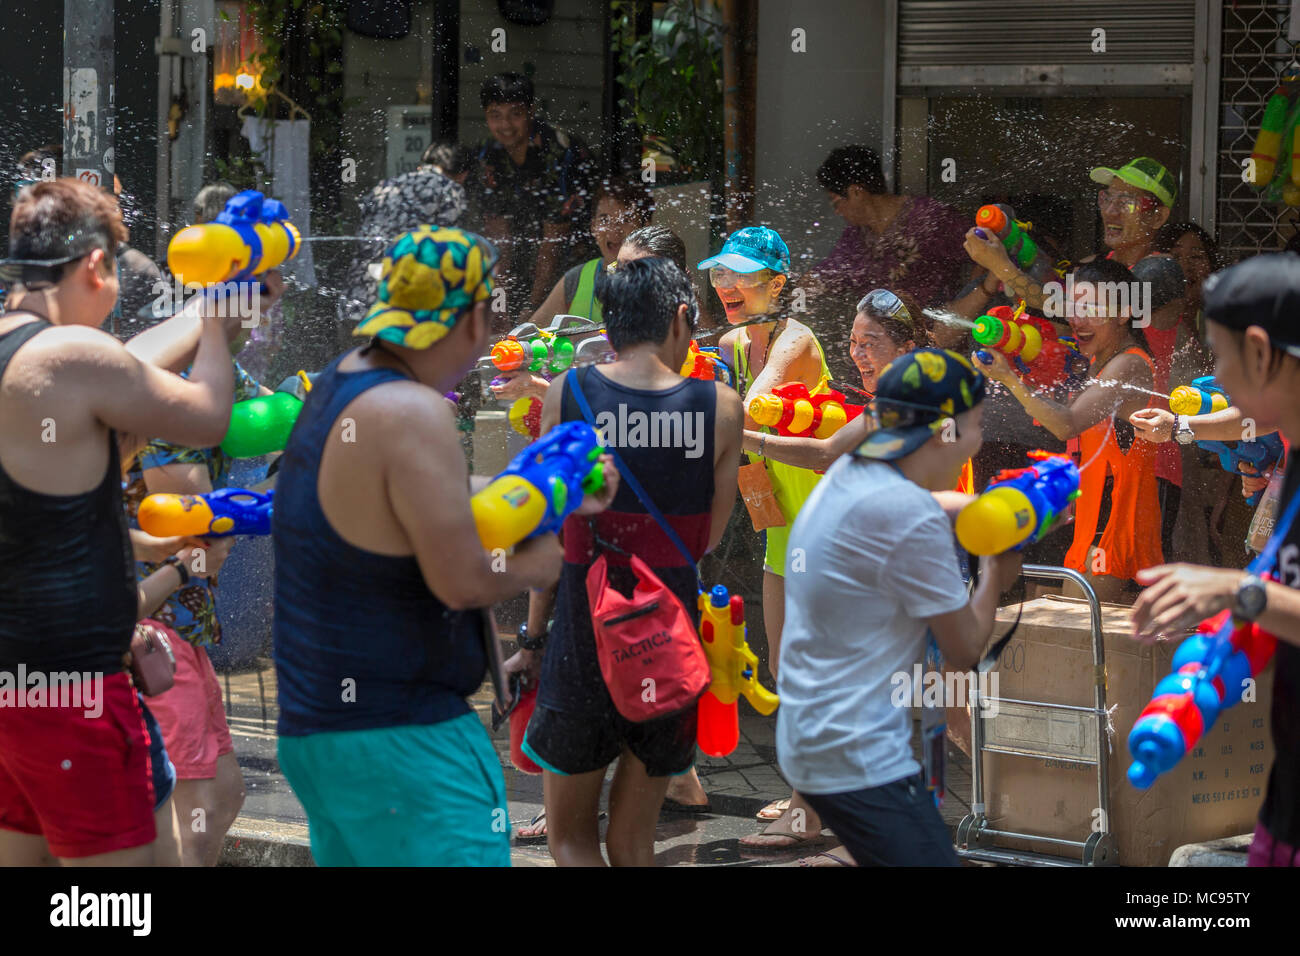 BANGKOK, THAILAND - APRIL 13, 2018: People on the streets of Bangkok during the first day of Songkran Festival, Thai New Year celebrations. Stock Photo